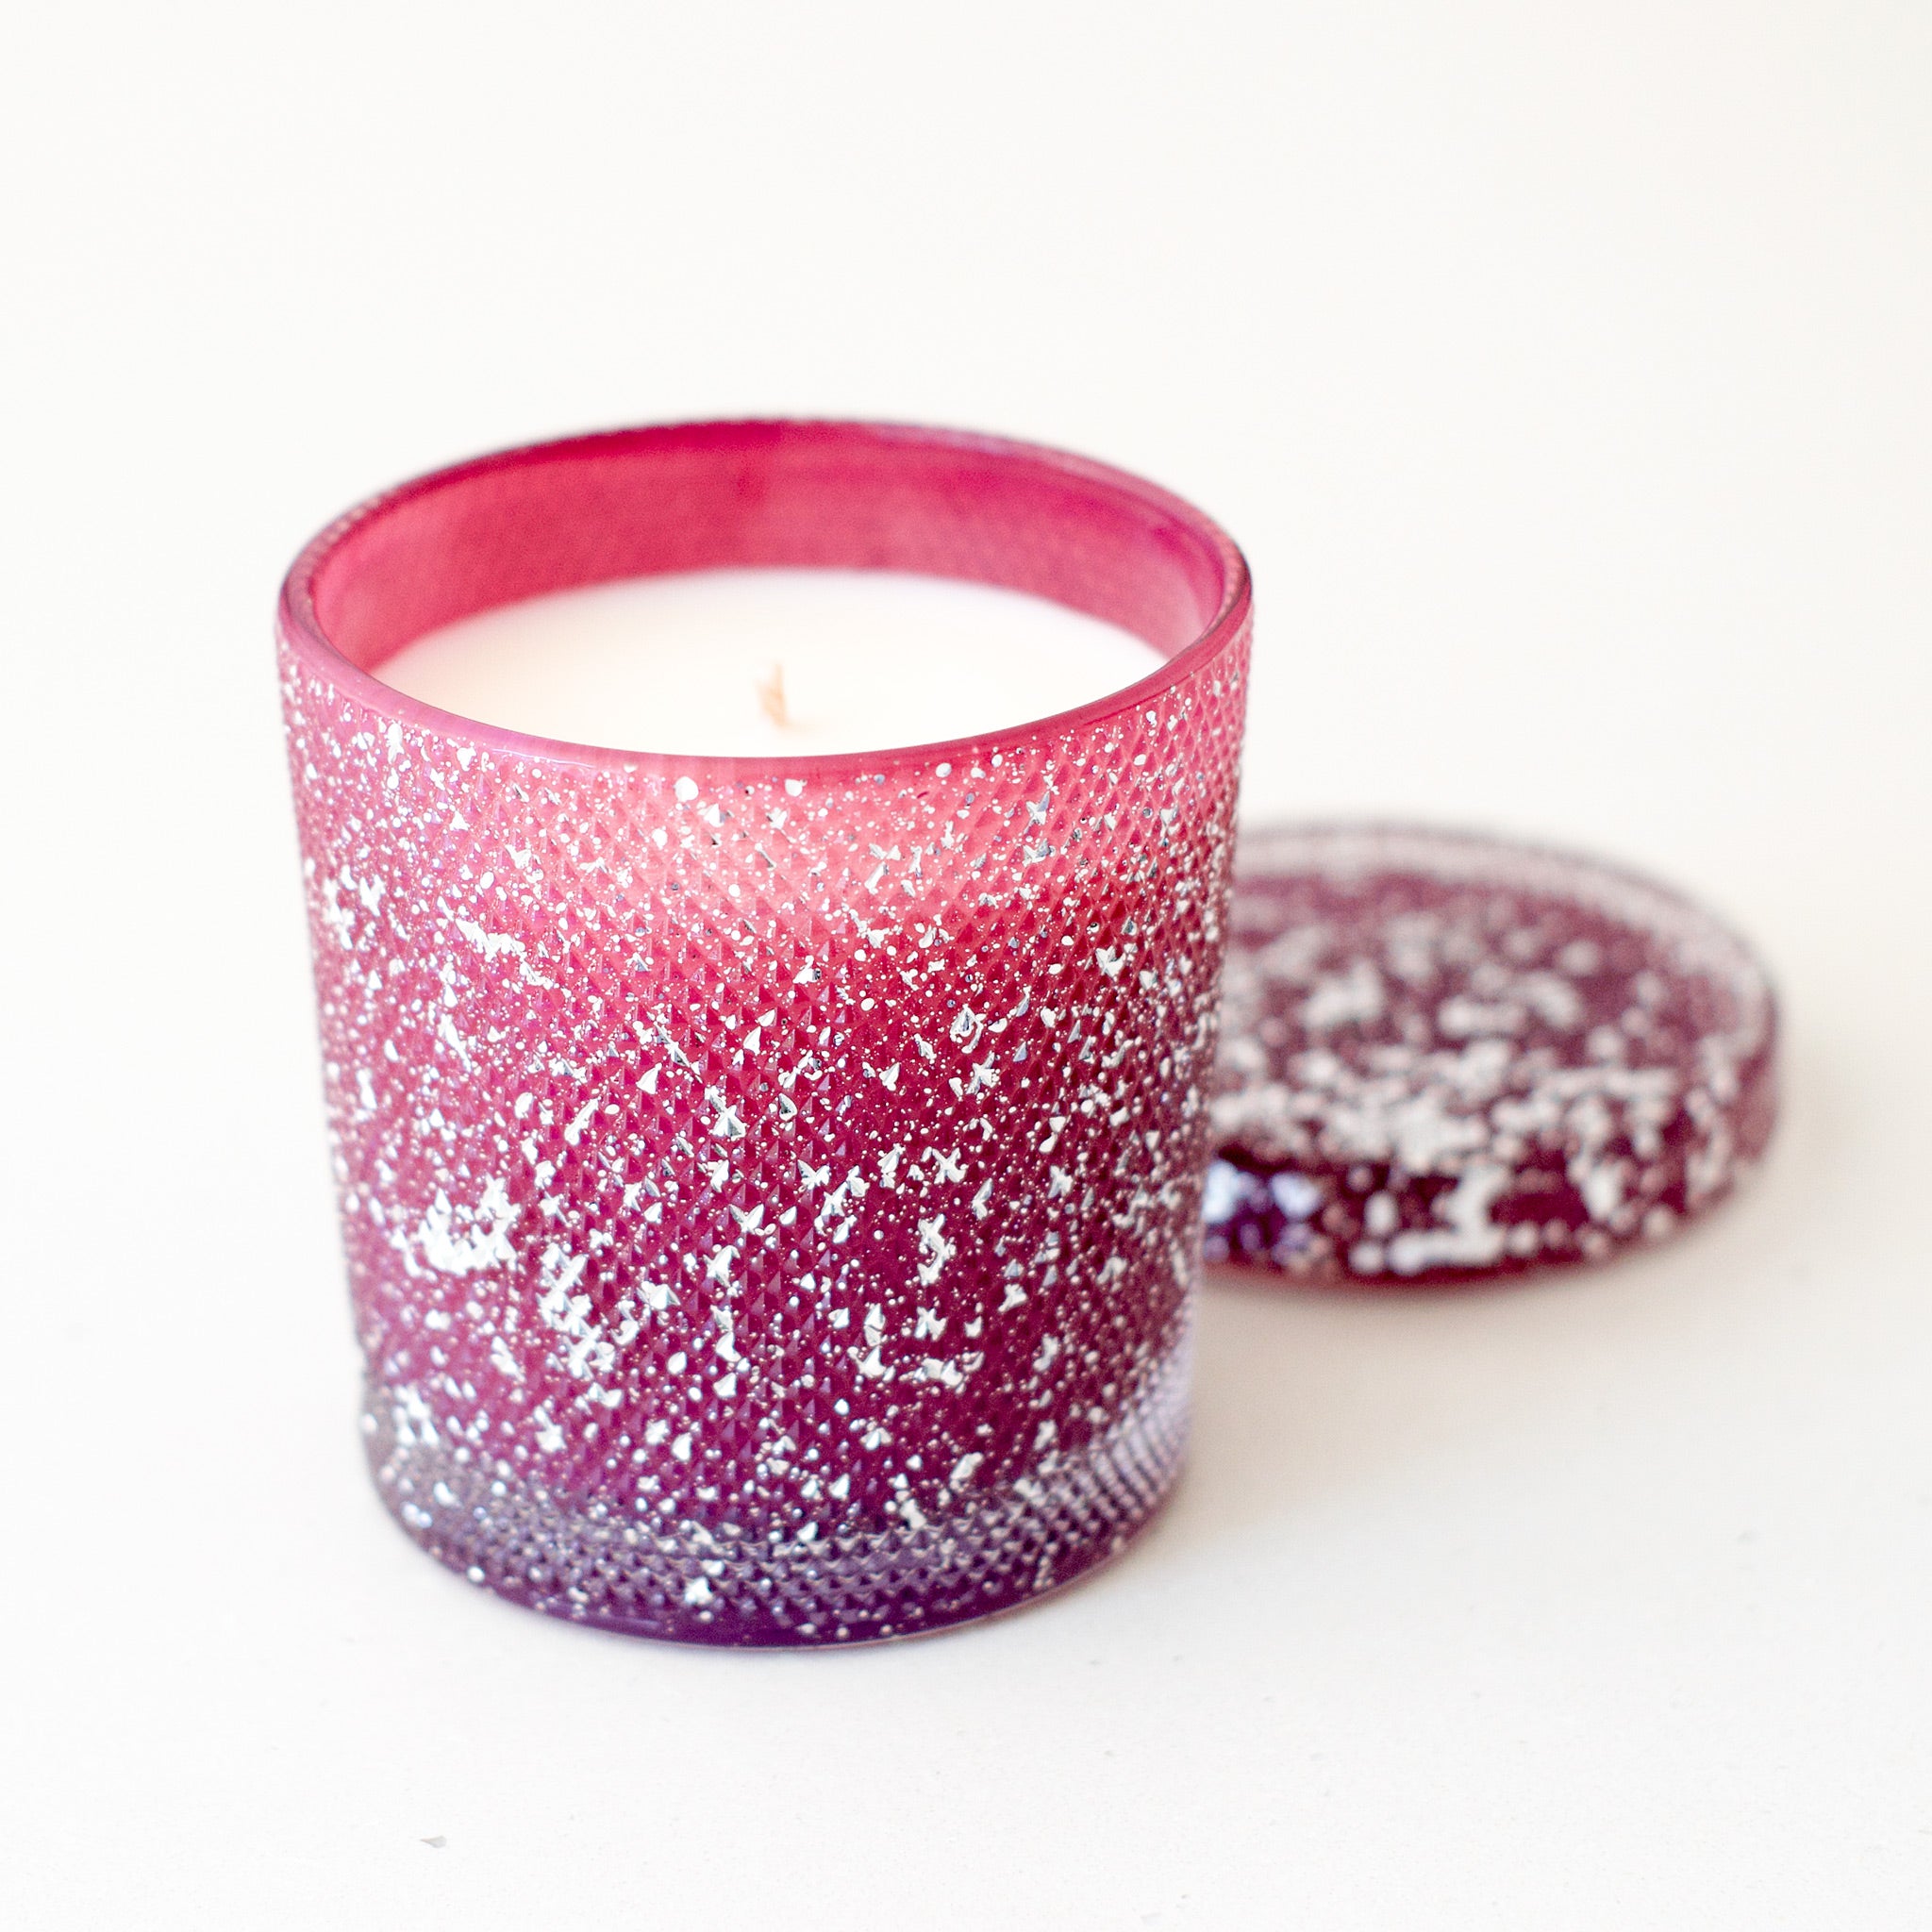 Candle of the Month - Violet Sky